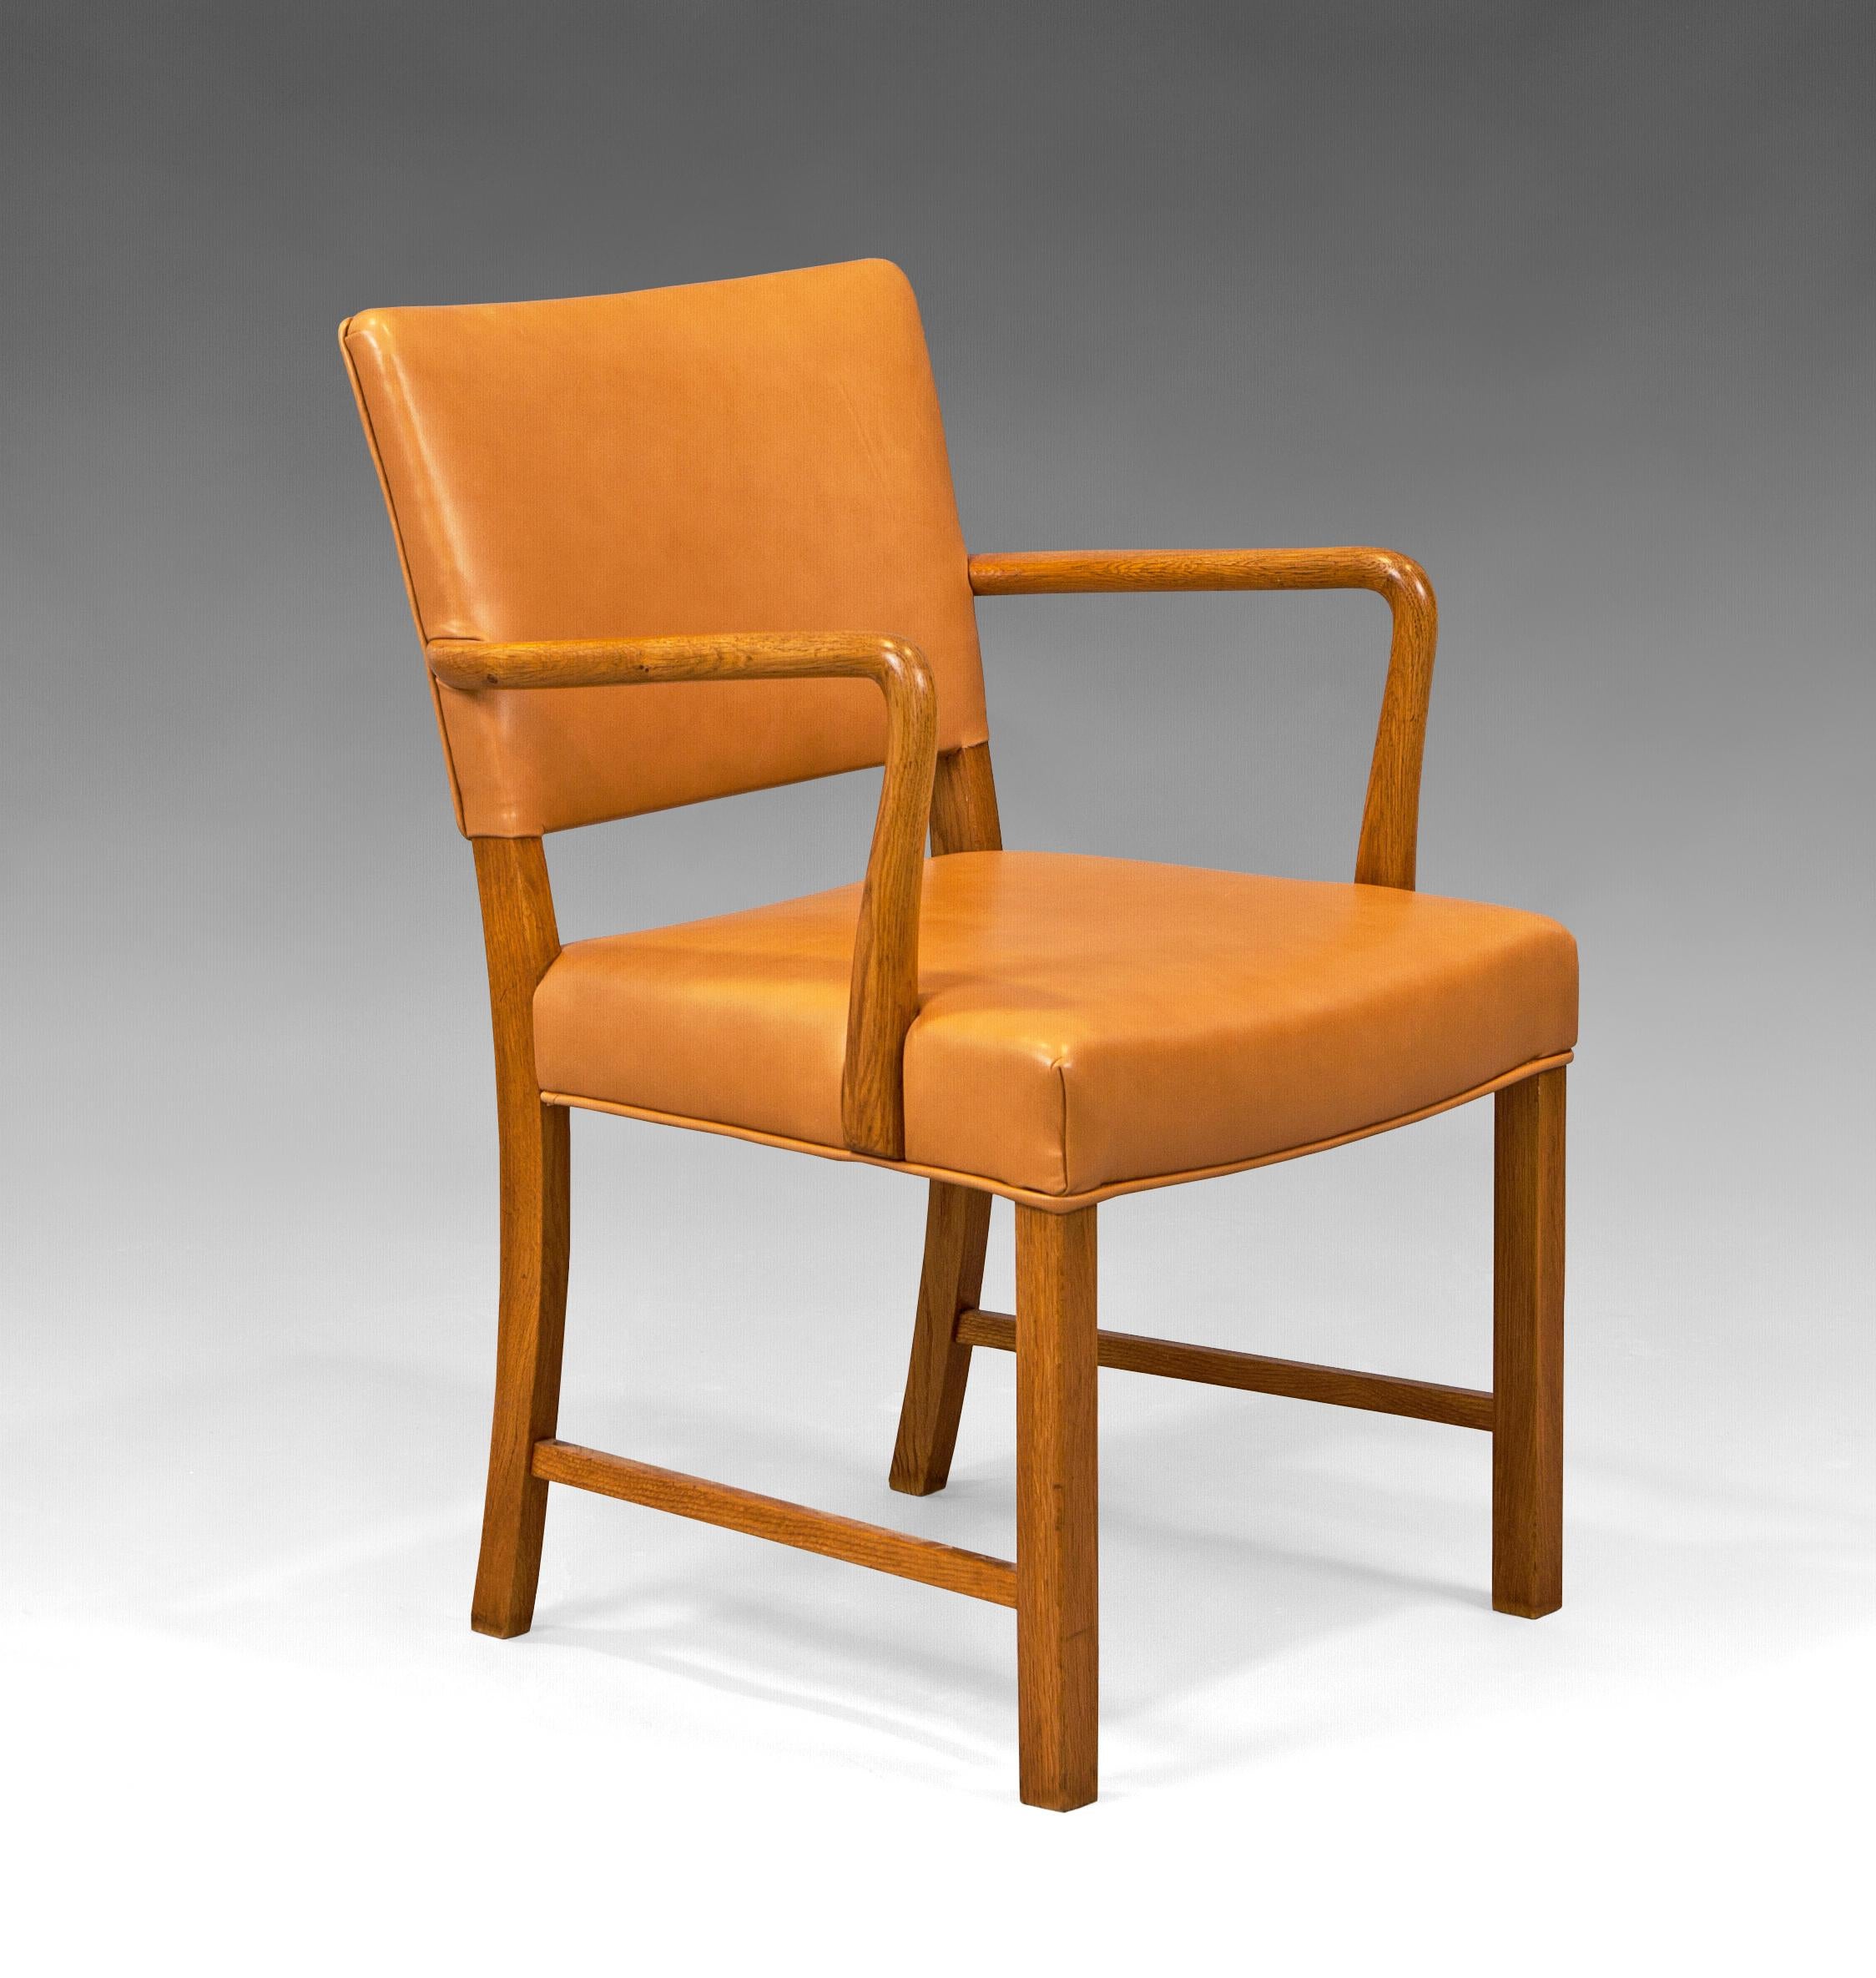 Oak Frame and Leather Chair by Karee Klint (attributed) for I.C.A. Jensen. Denmark, 1930s.
Excellent restored condition and reupholstered in leather.

 